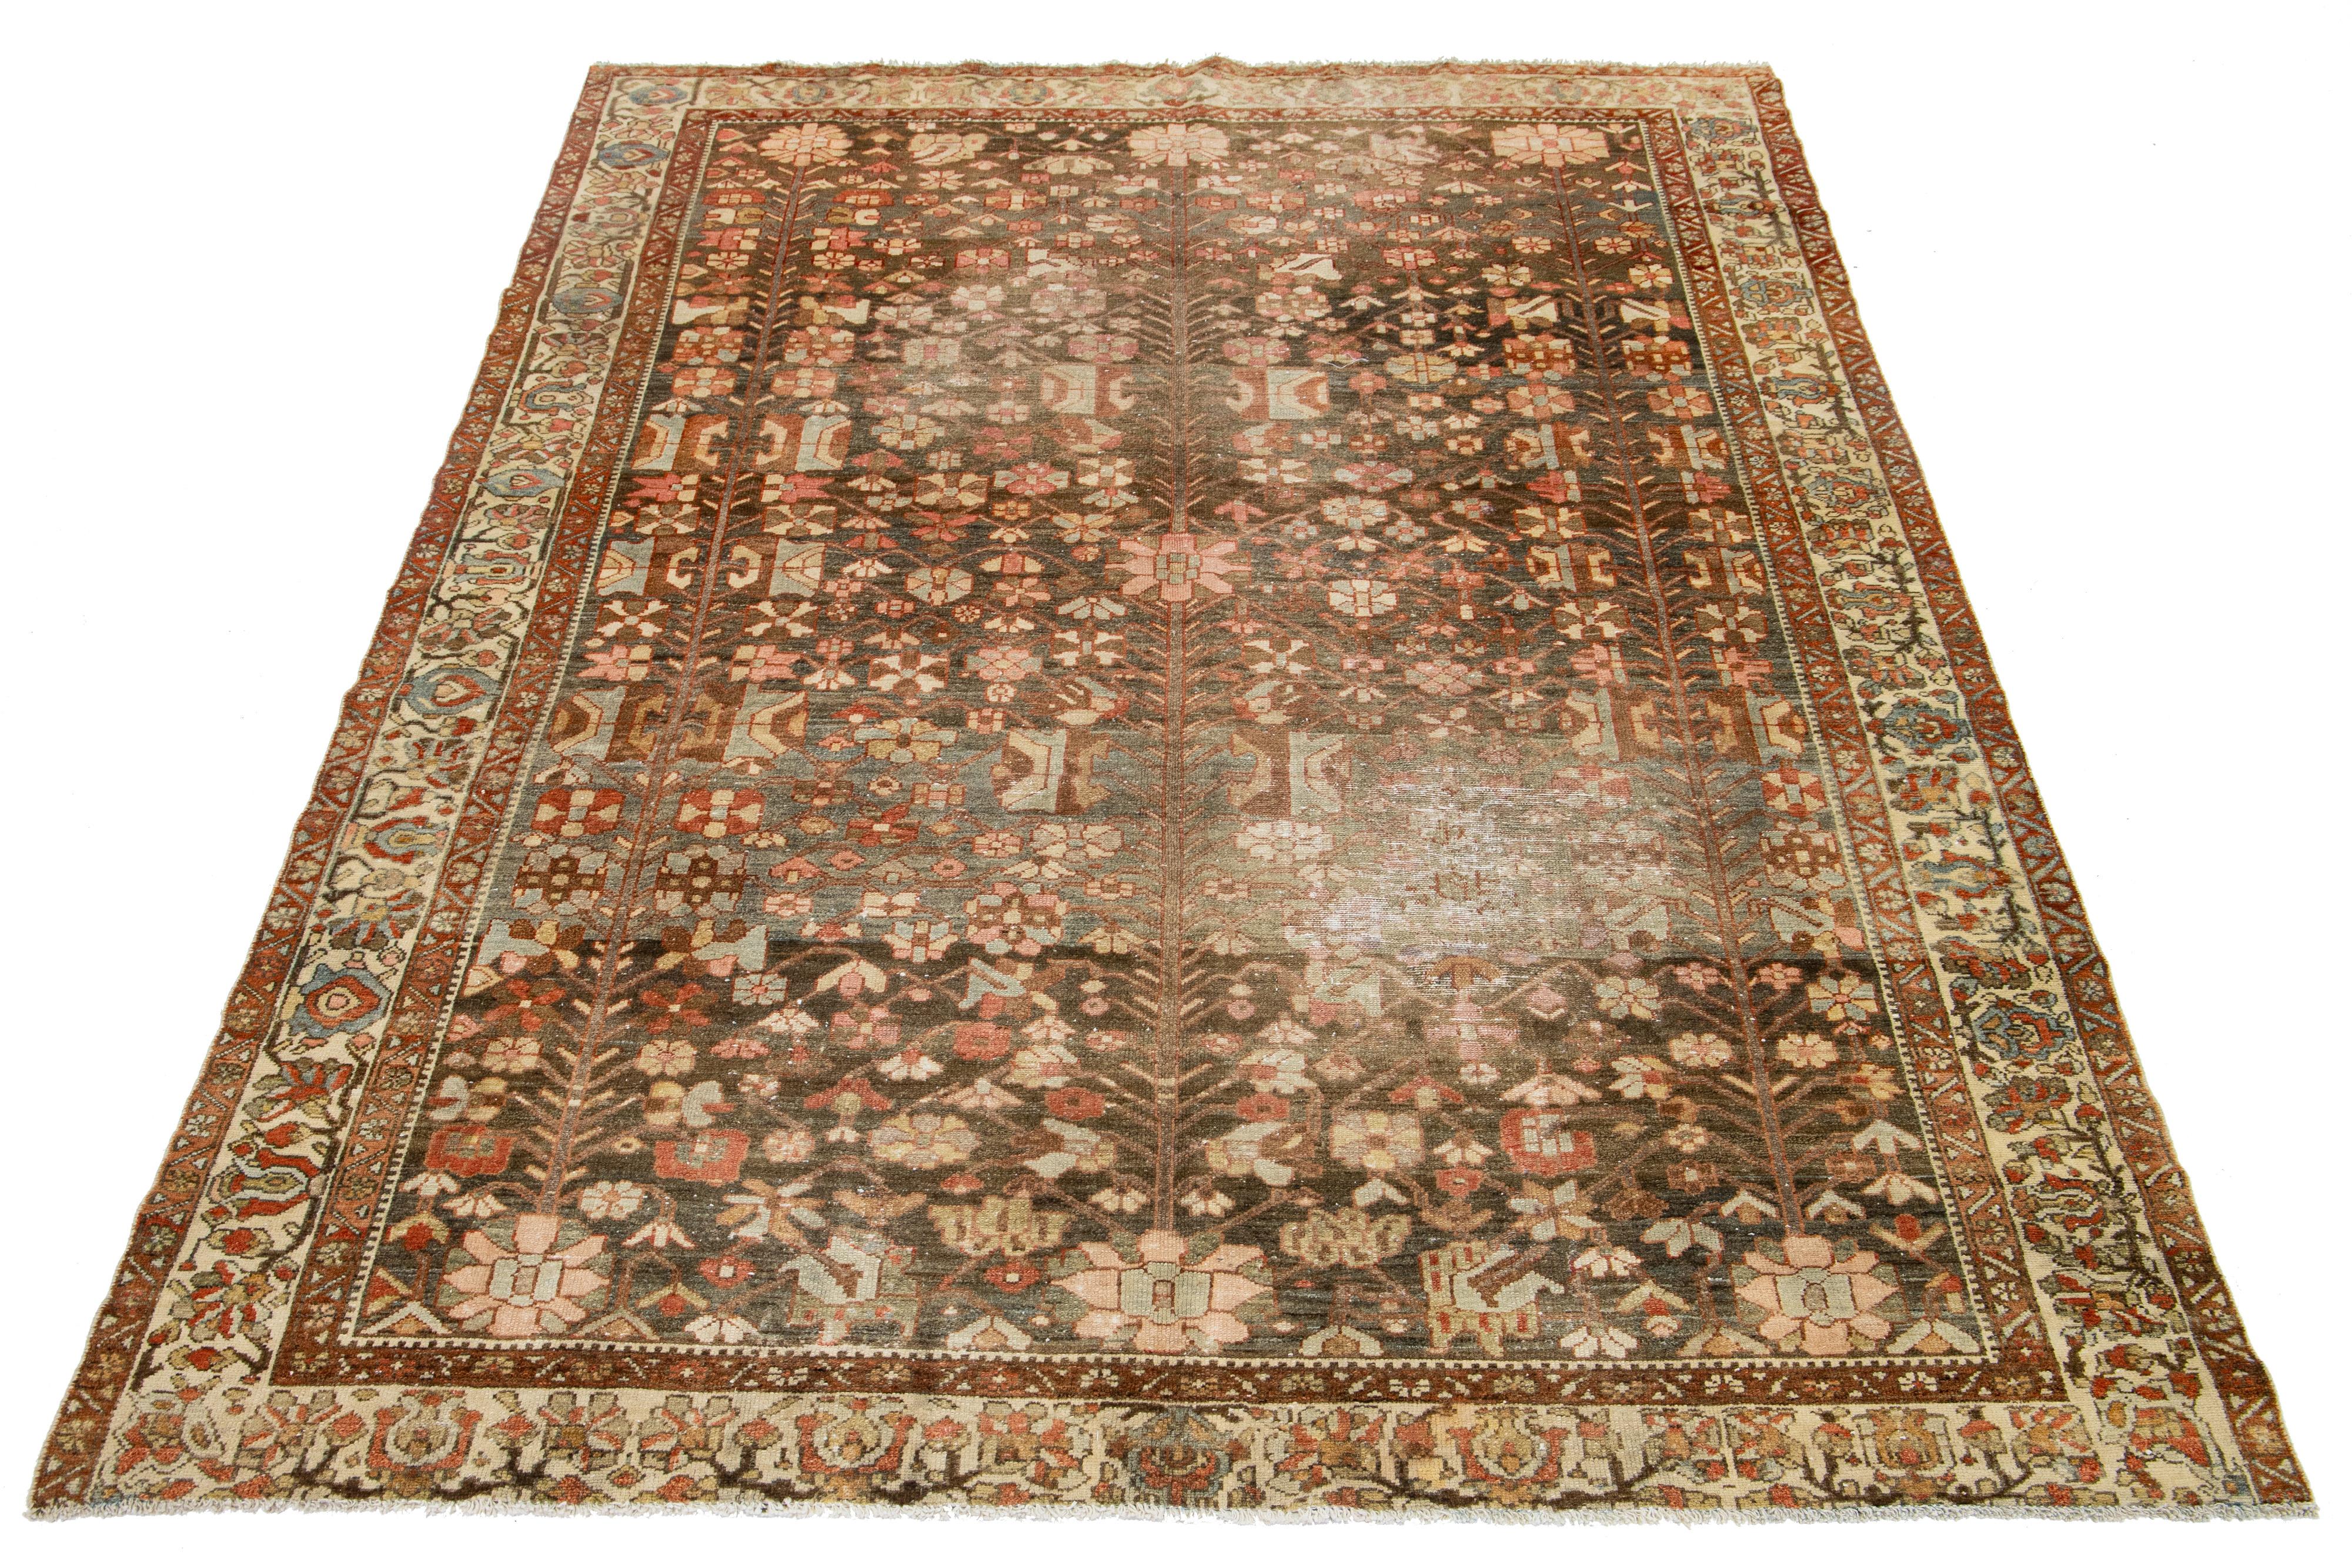 This room-size antique Hamadan hand-knotted wool rug is beautiful, featuring a brown color field. It showcases a stunning allover floral design in the Persian style with accents of blue, beige, and peach.

This rug measures 6'9